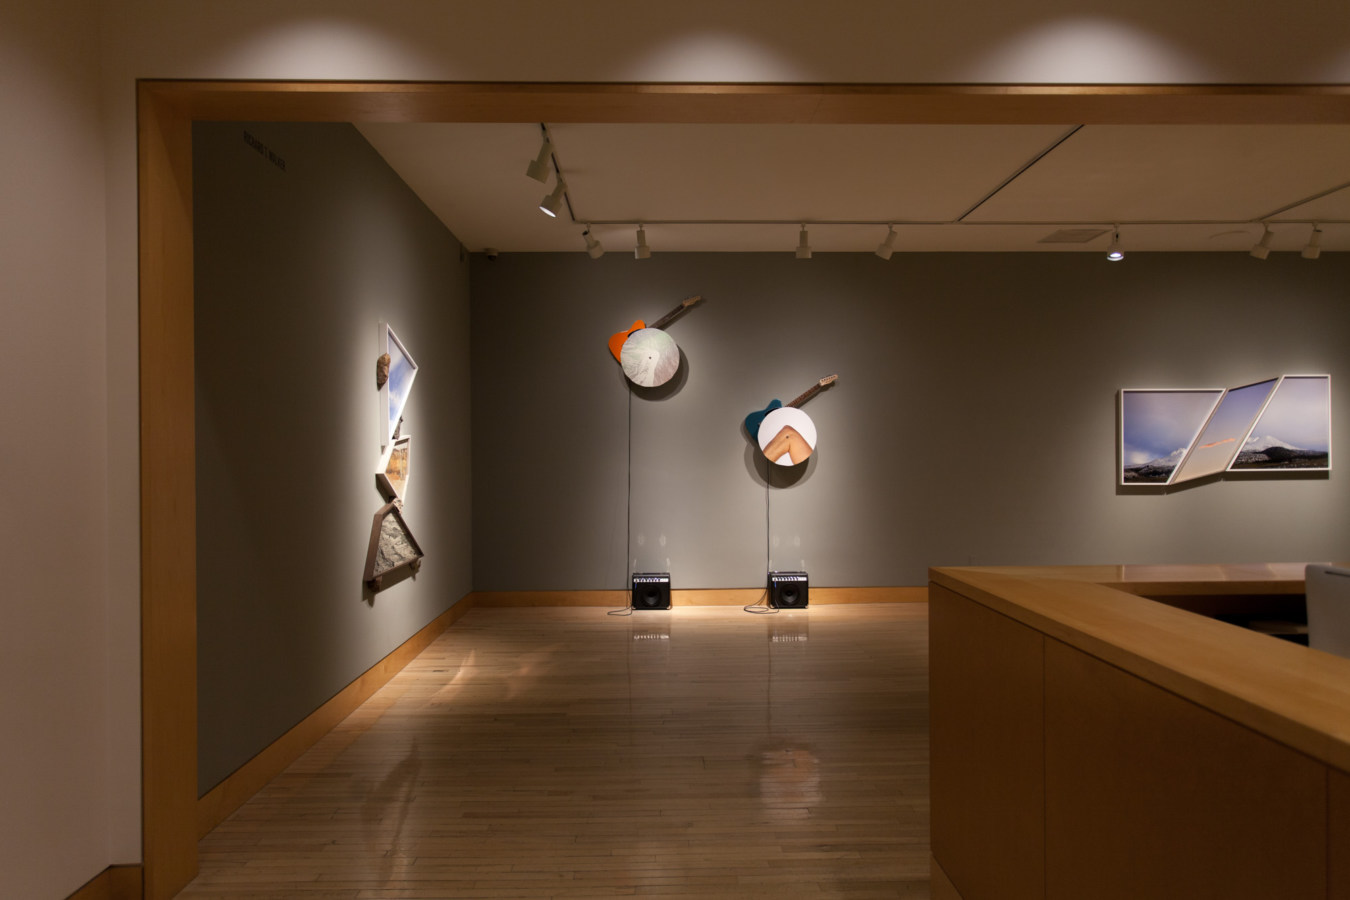 Color image of gallery entryway exhibiting mixed media and sculptural sound works on grey gallery walls